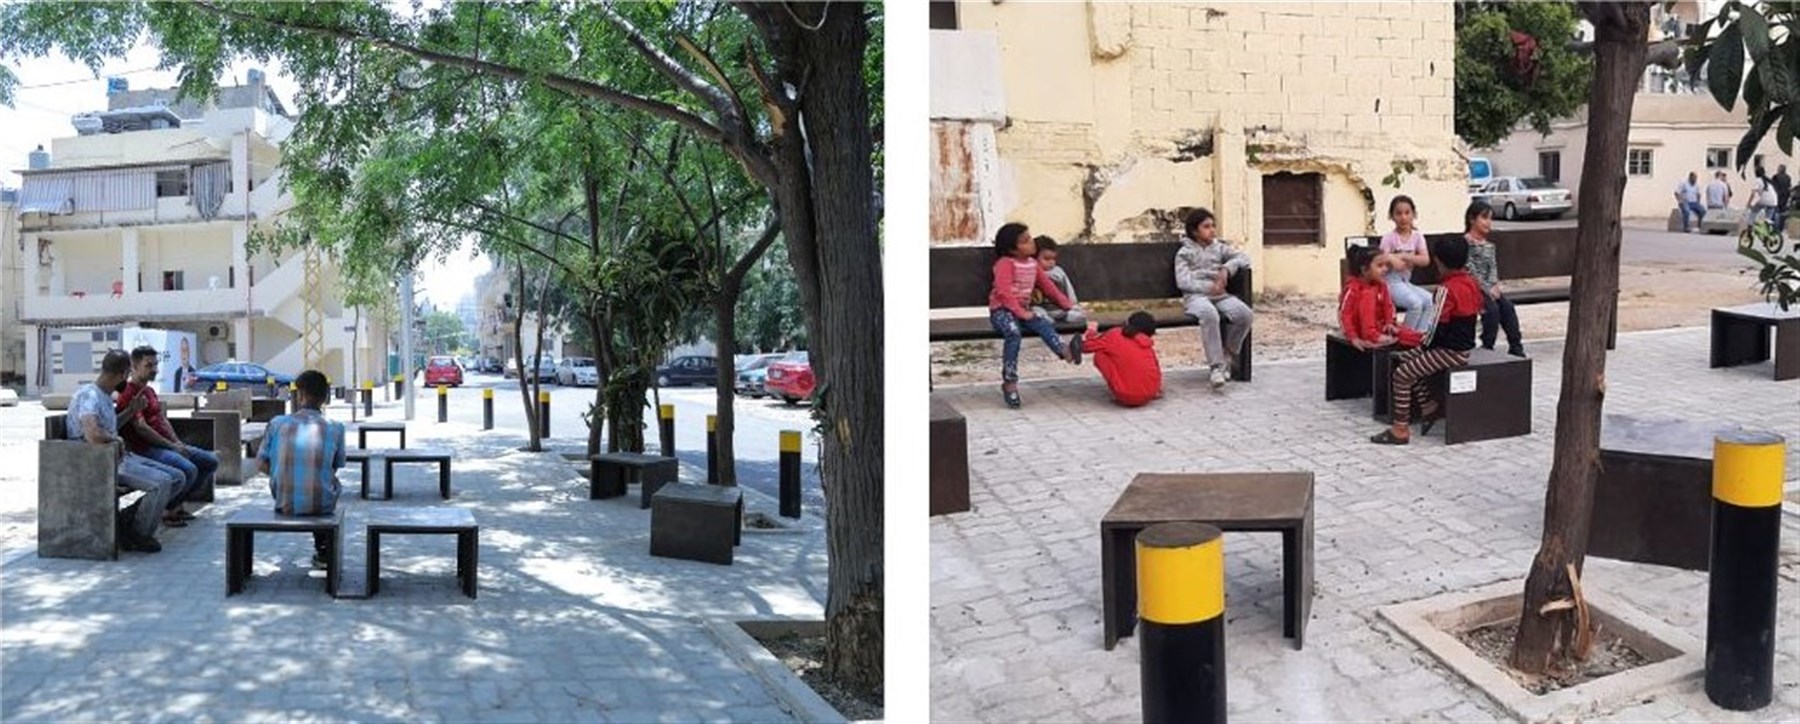 Pictures showing the space after the completion of the design intervention. The pictures depict how they are used by different community groups. (Source: to the left, Postray, 2022; to the right, Hasan Al-Aswad, 2022)